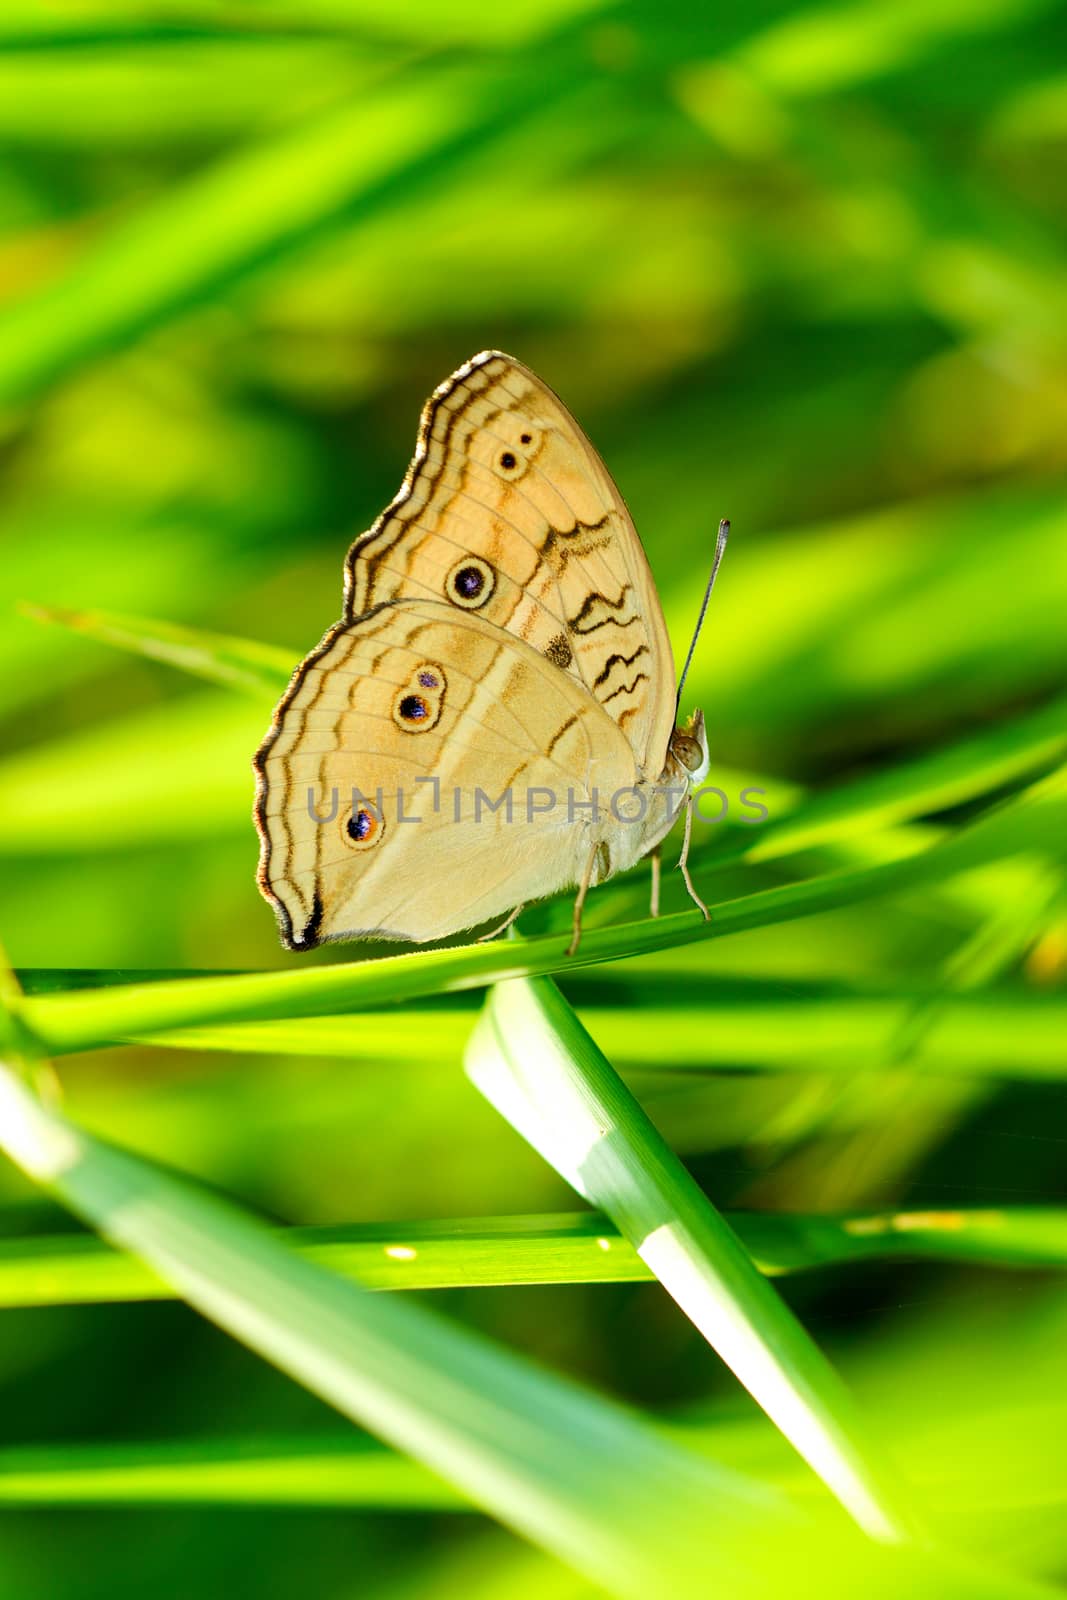 Beautiful butterfly on a blade of grass.